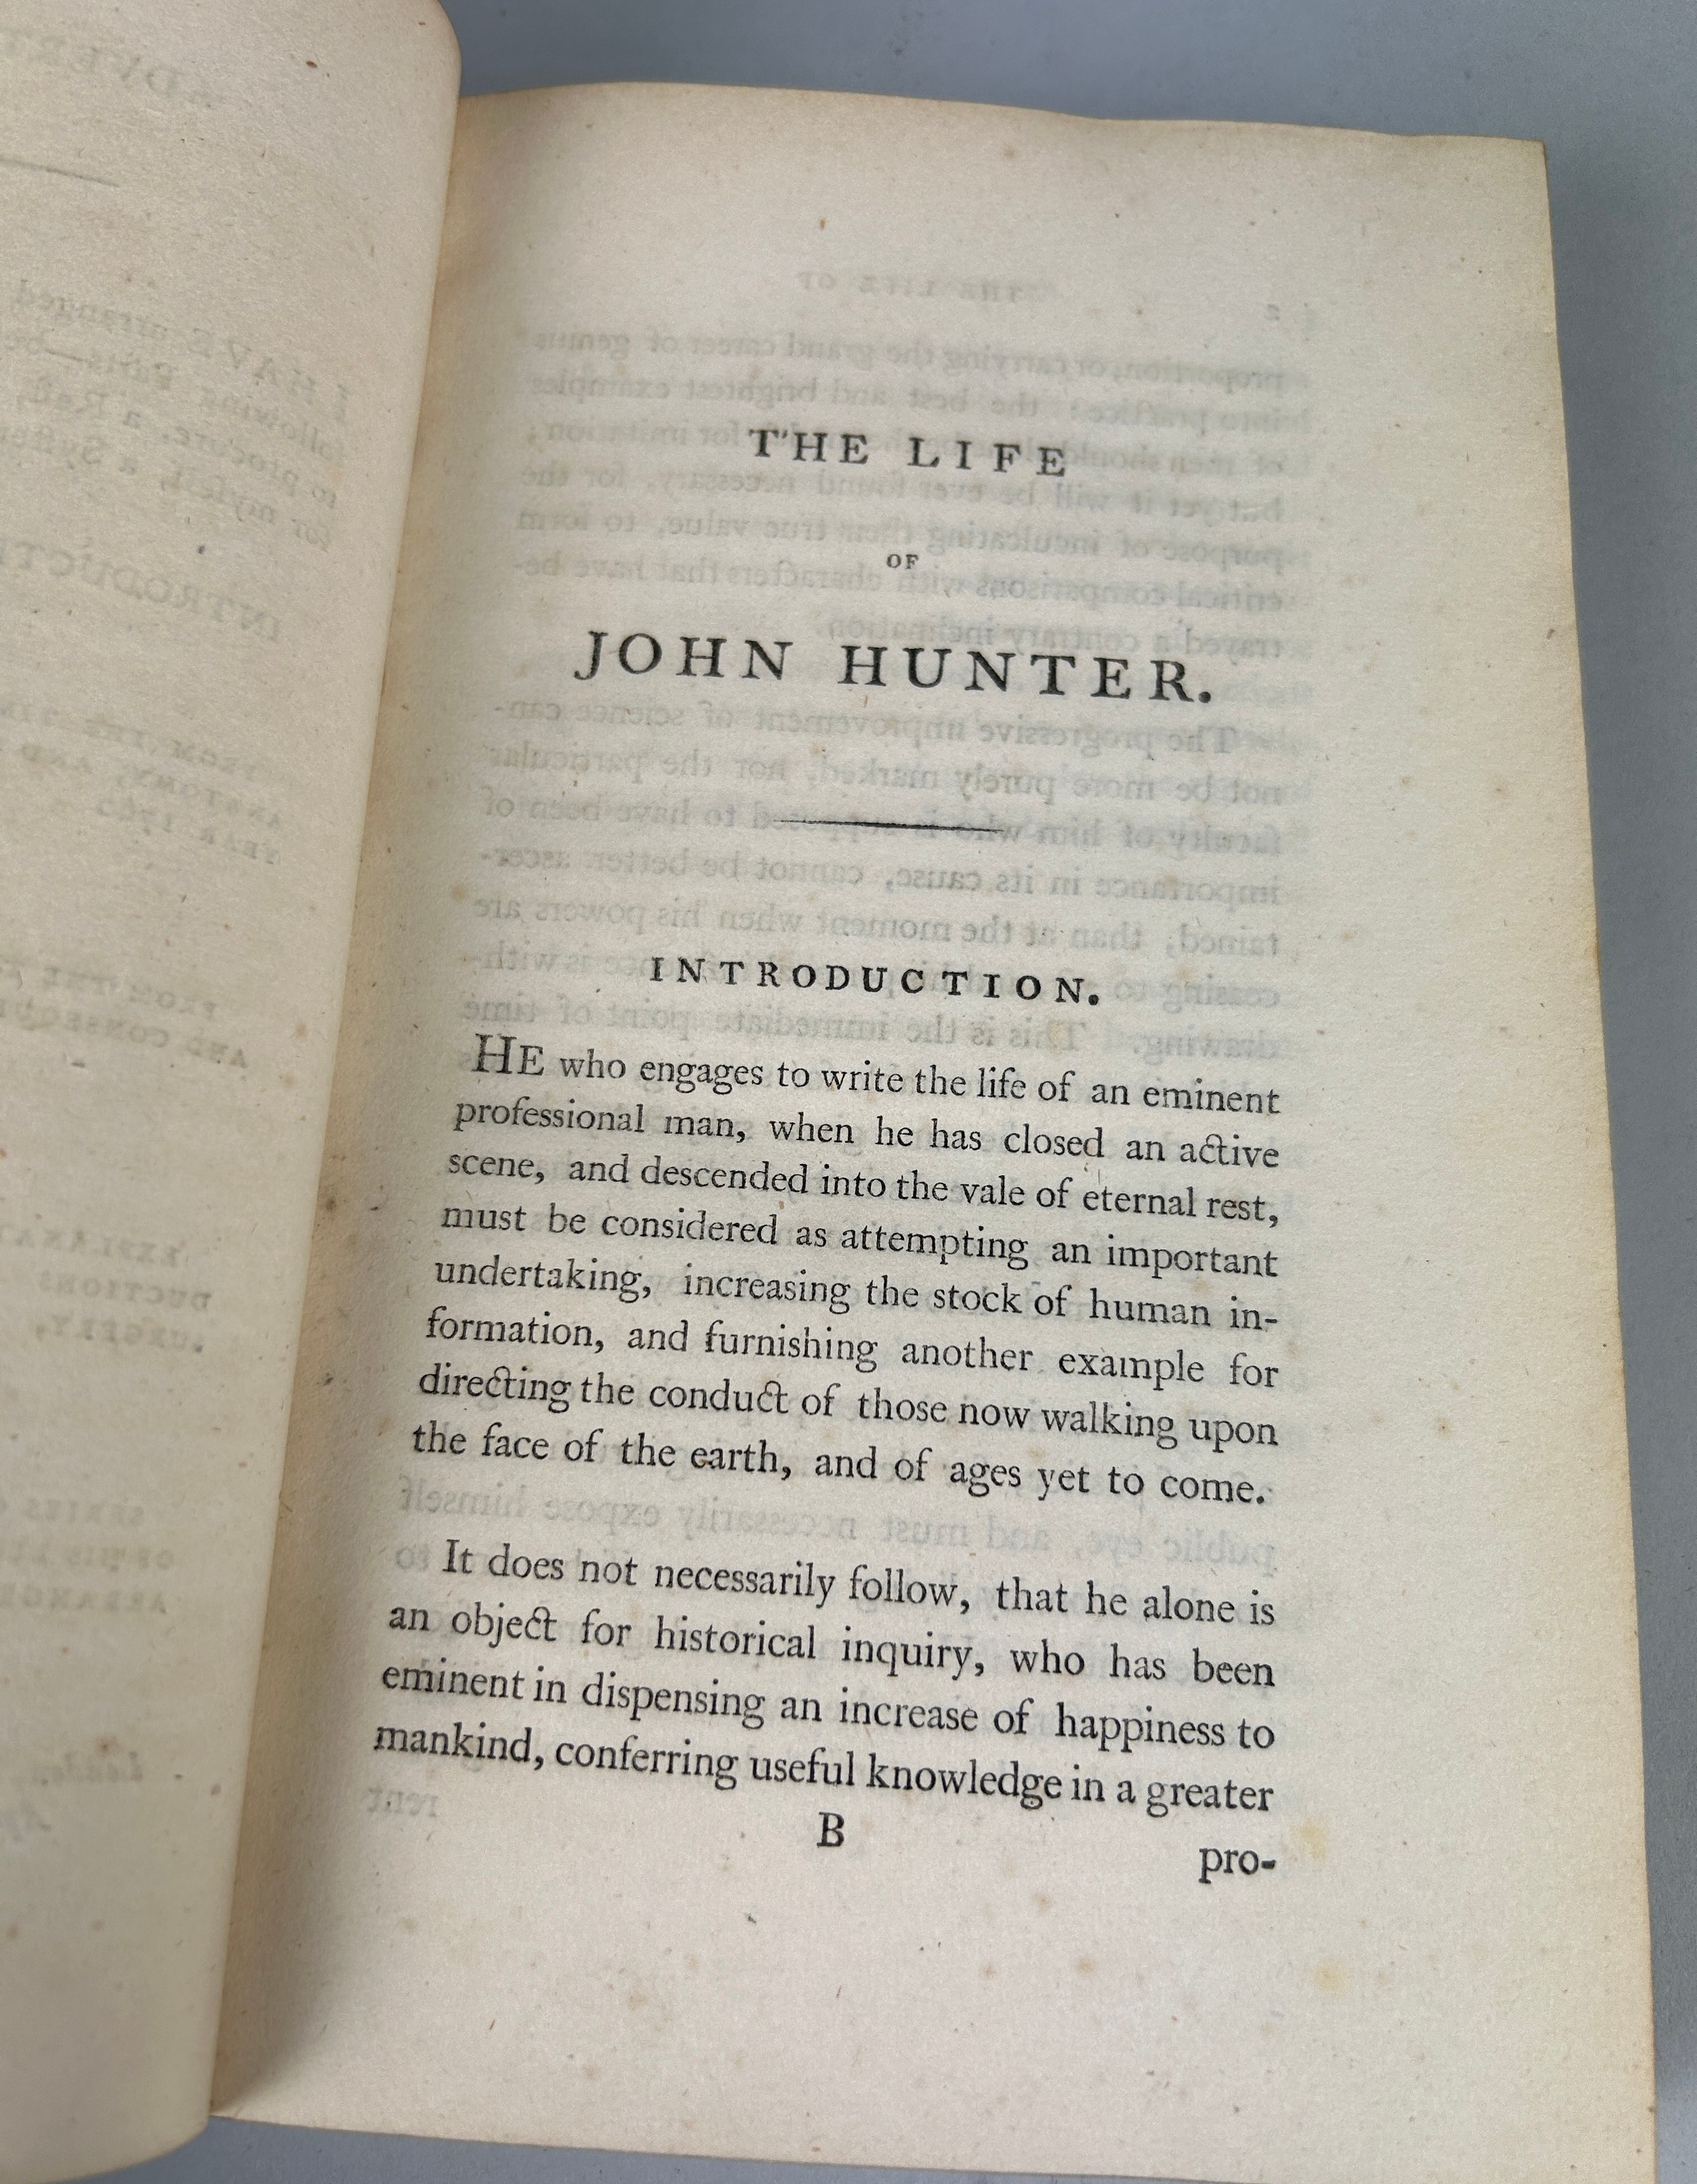 THE LIFE OF JOHN HUNTER, JESSE FOOT (SURGEON) LONDON, T.BECKET, PALL MALL, FIRST EDITION 1794, - Image 7 of 12